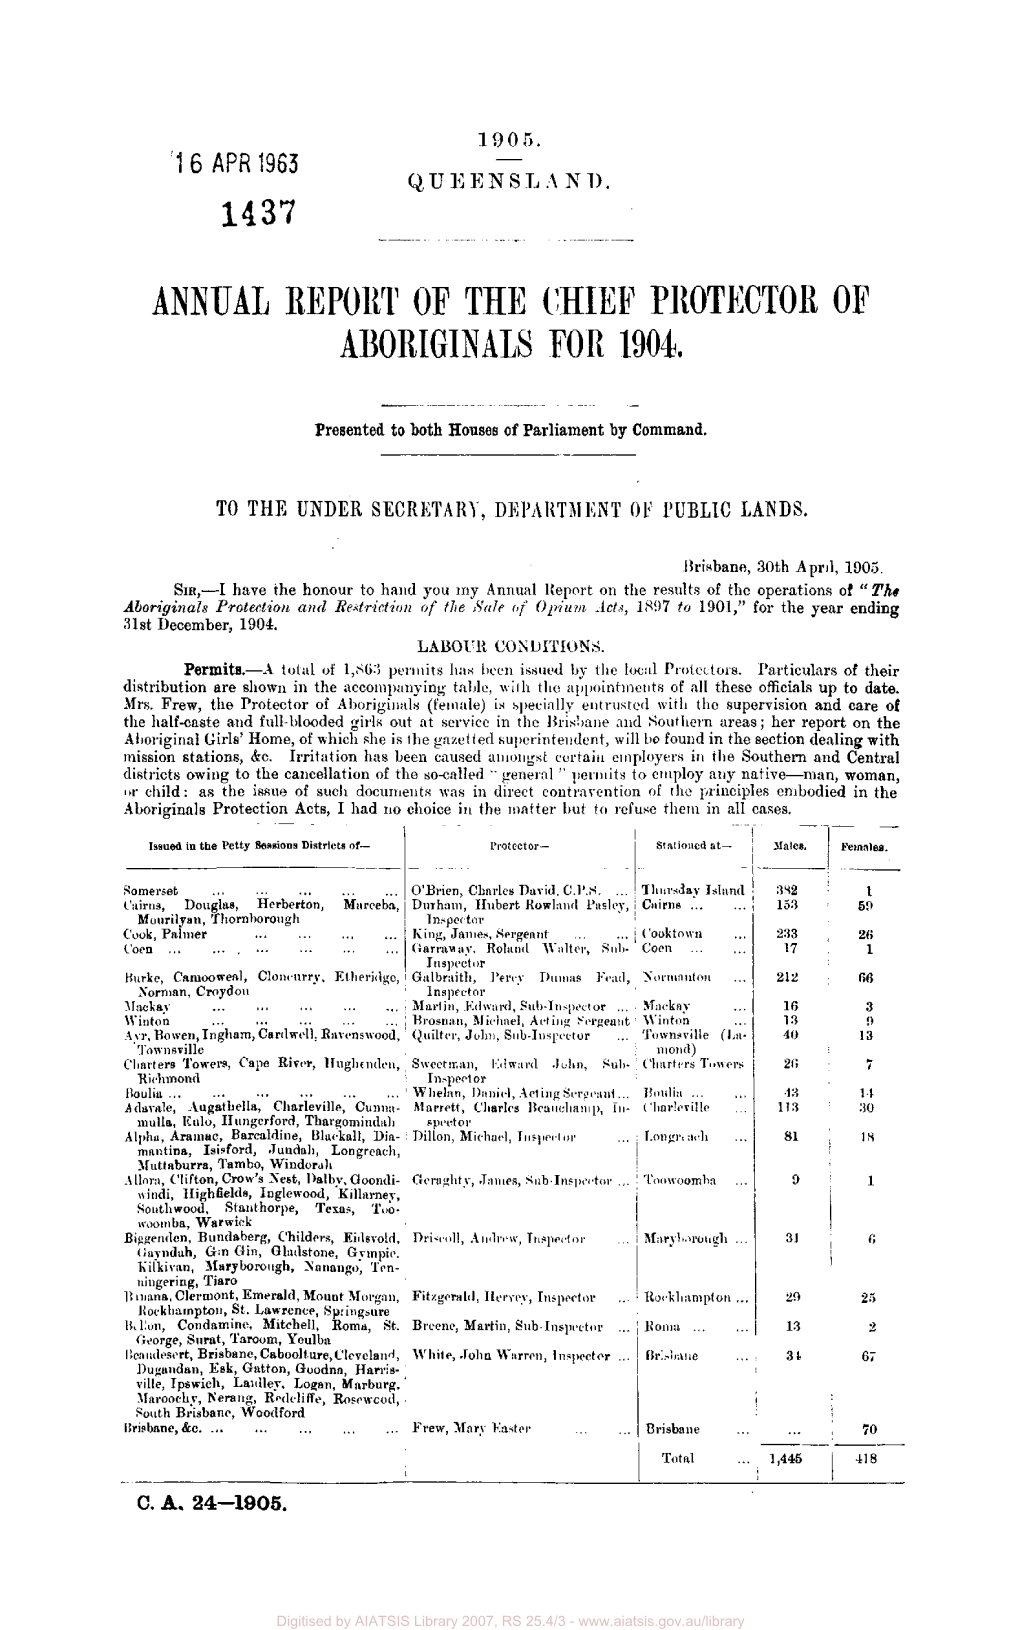 Annual Report of the Chief Protector of Aboriginals for 1904